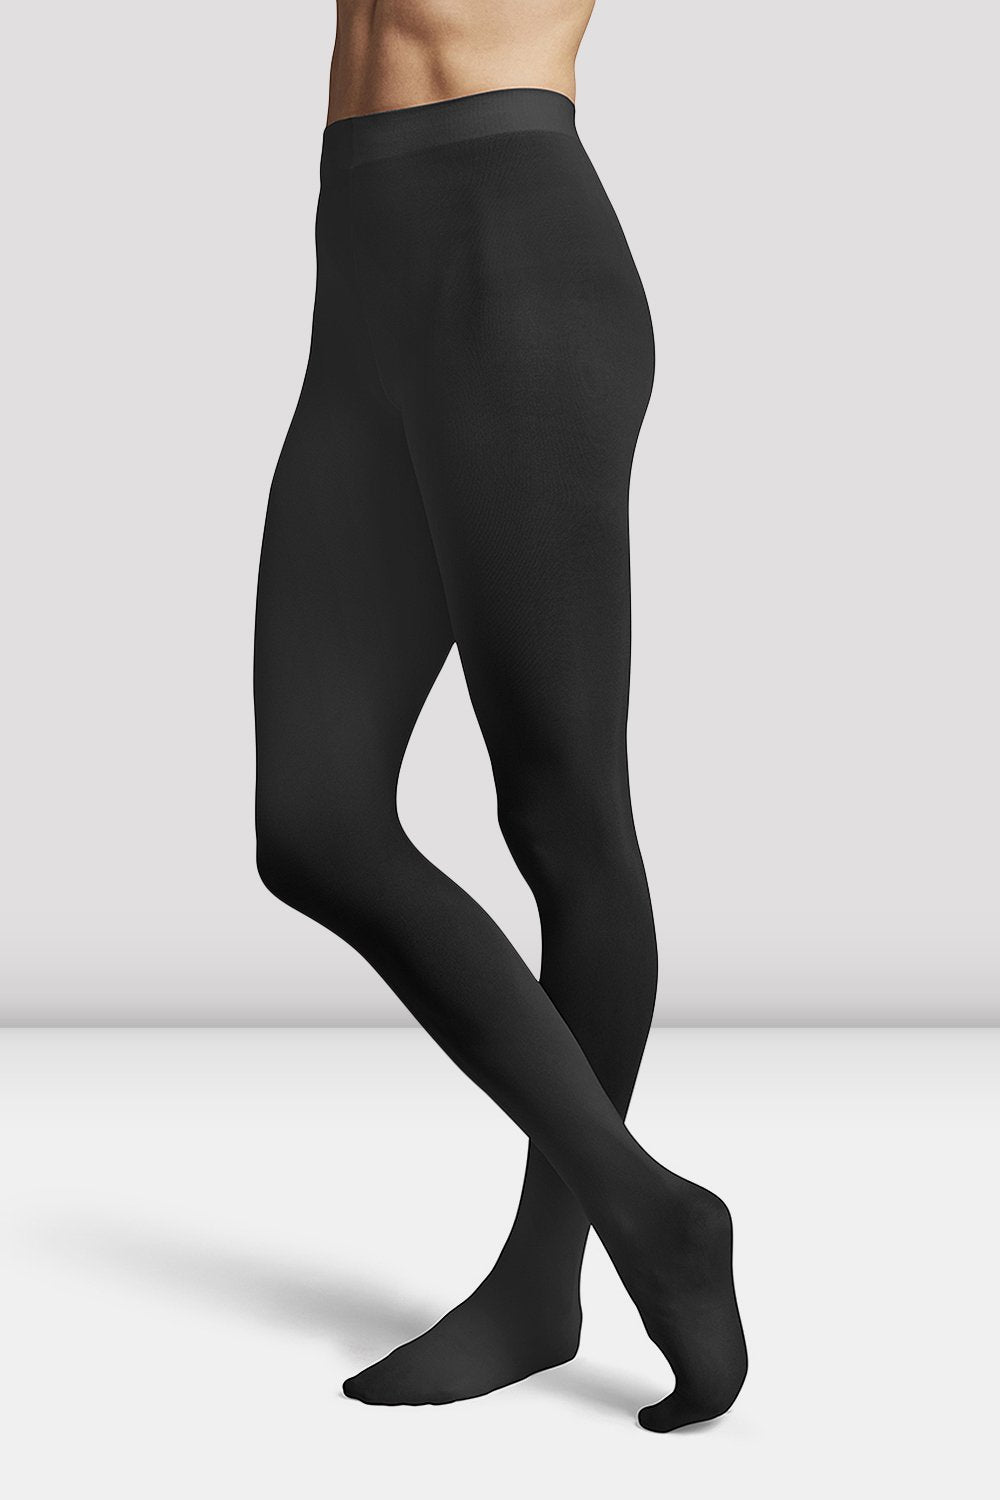 ContourSoft Footed Adult Tights